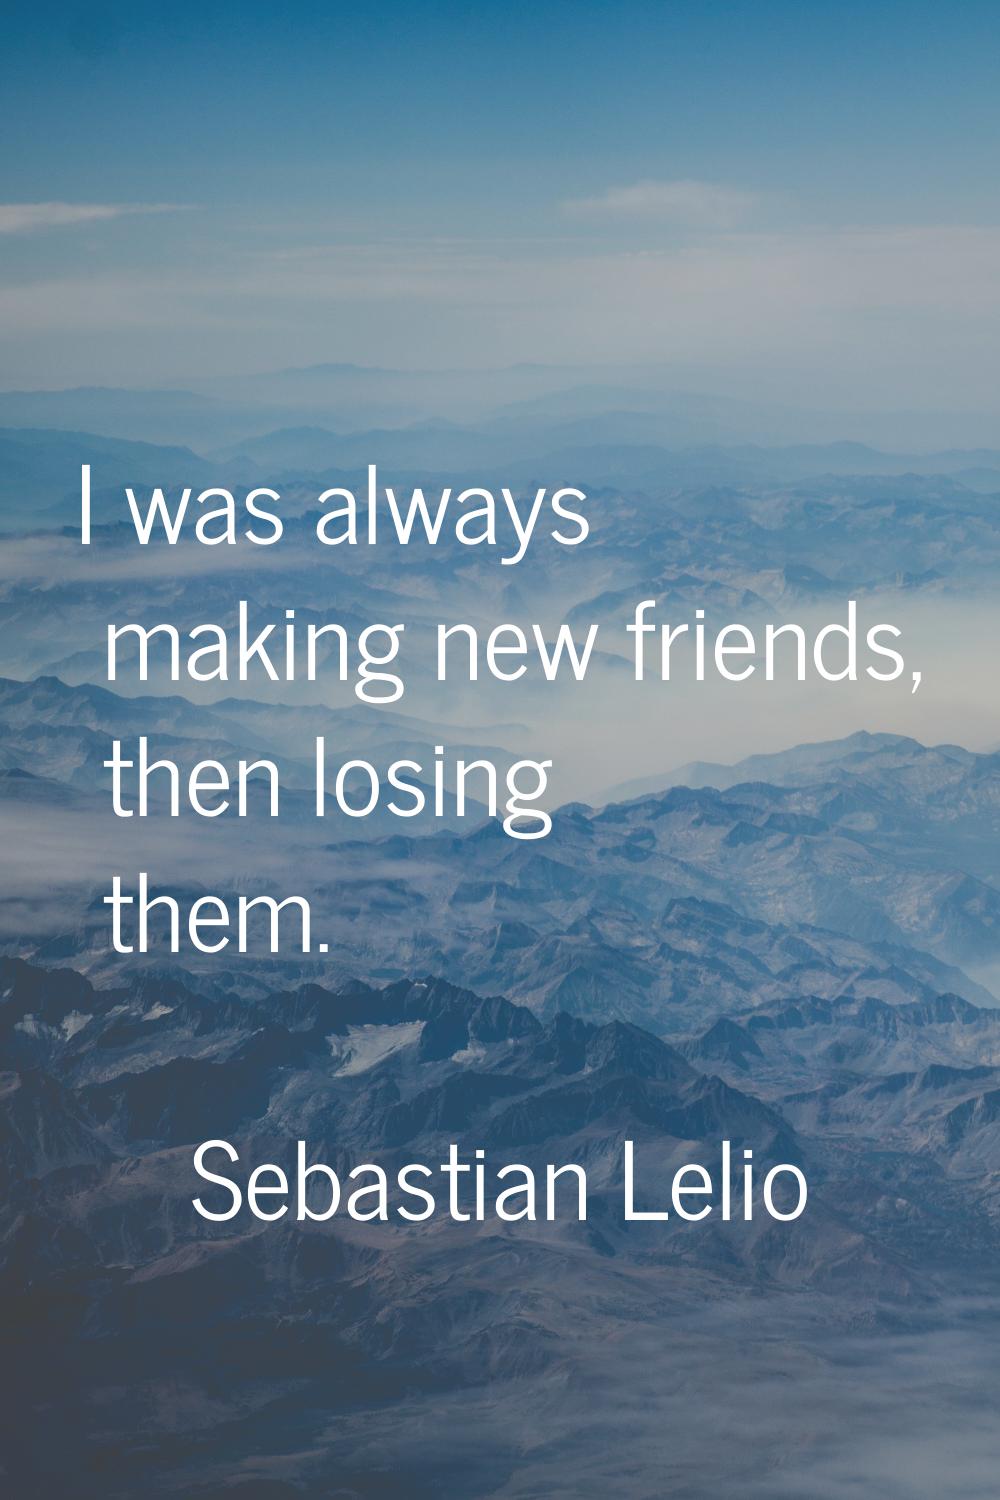 I was always making new friends, then losing them.